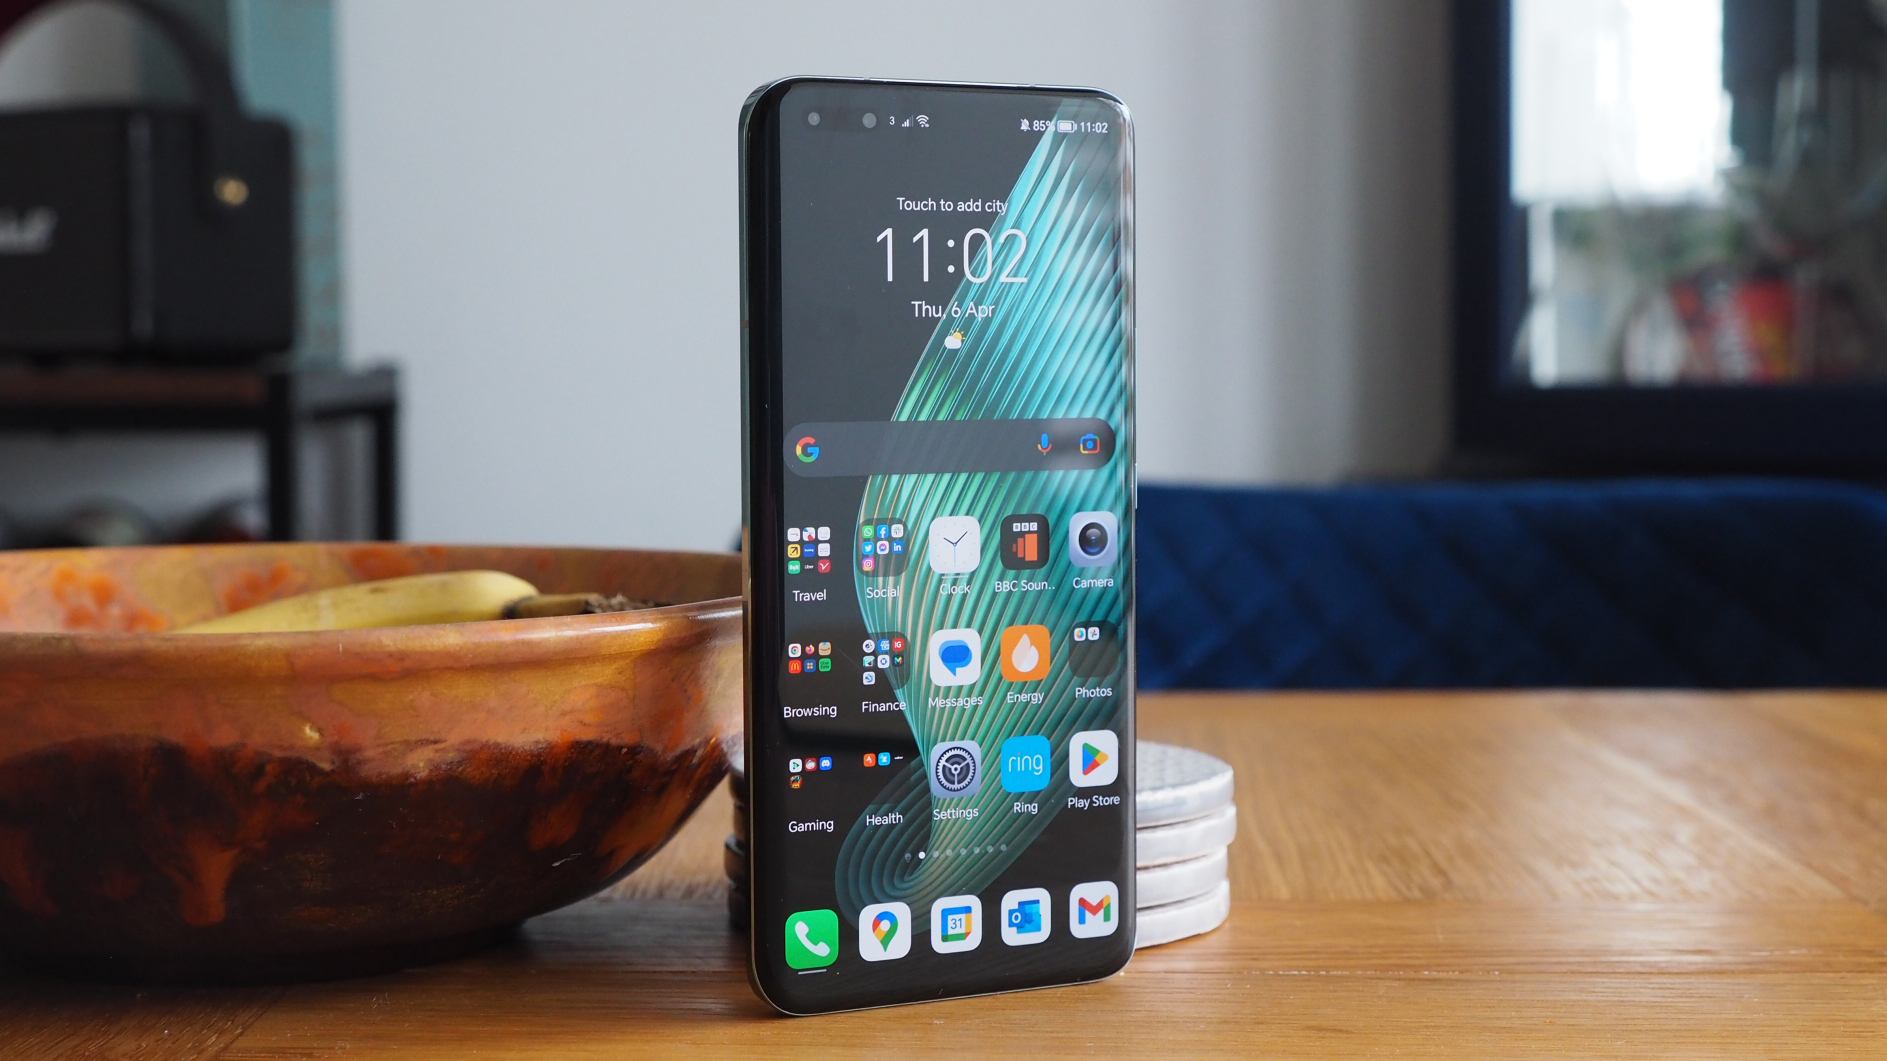 Honor Magic 5 Pro Review: Honor's latest top-end flagship is certainly one  to consider 